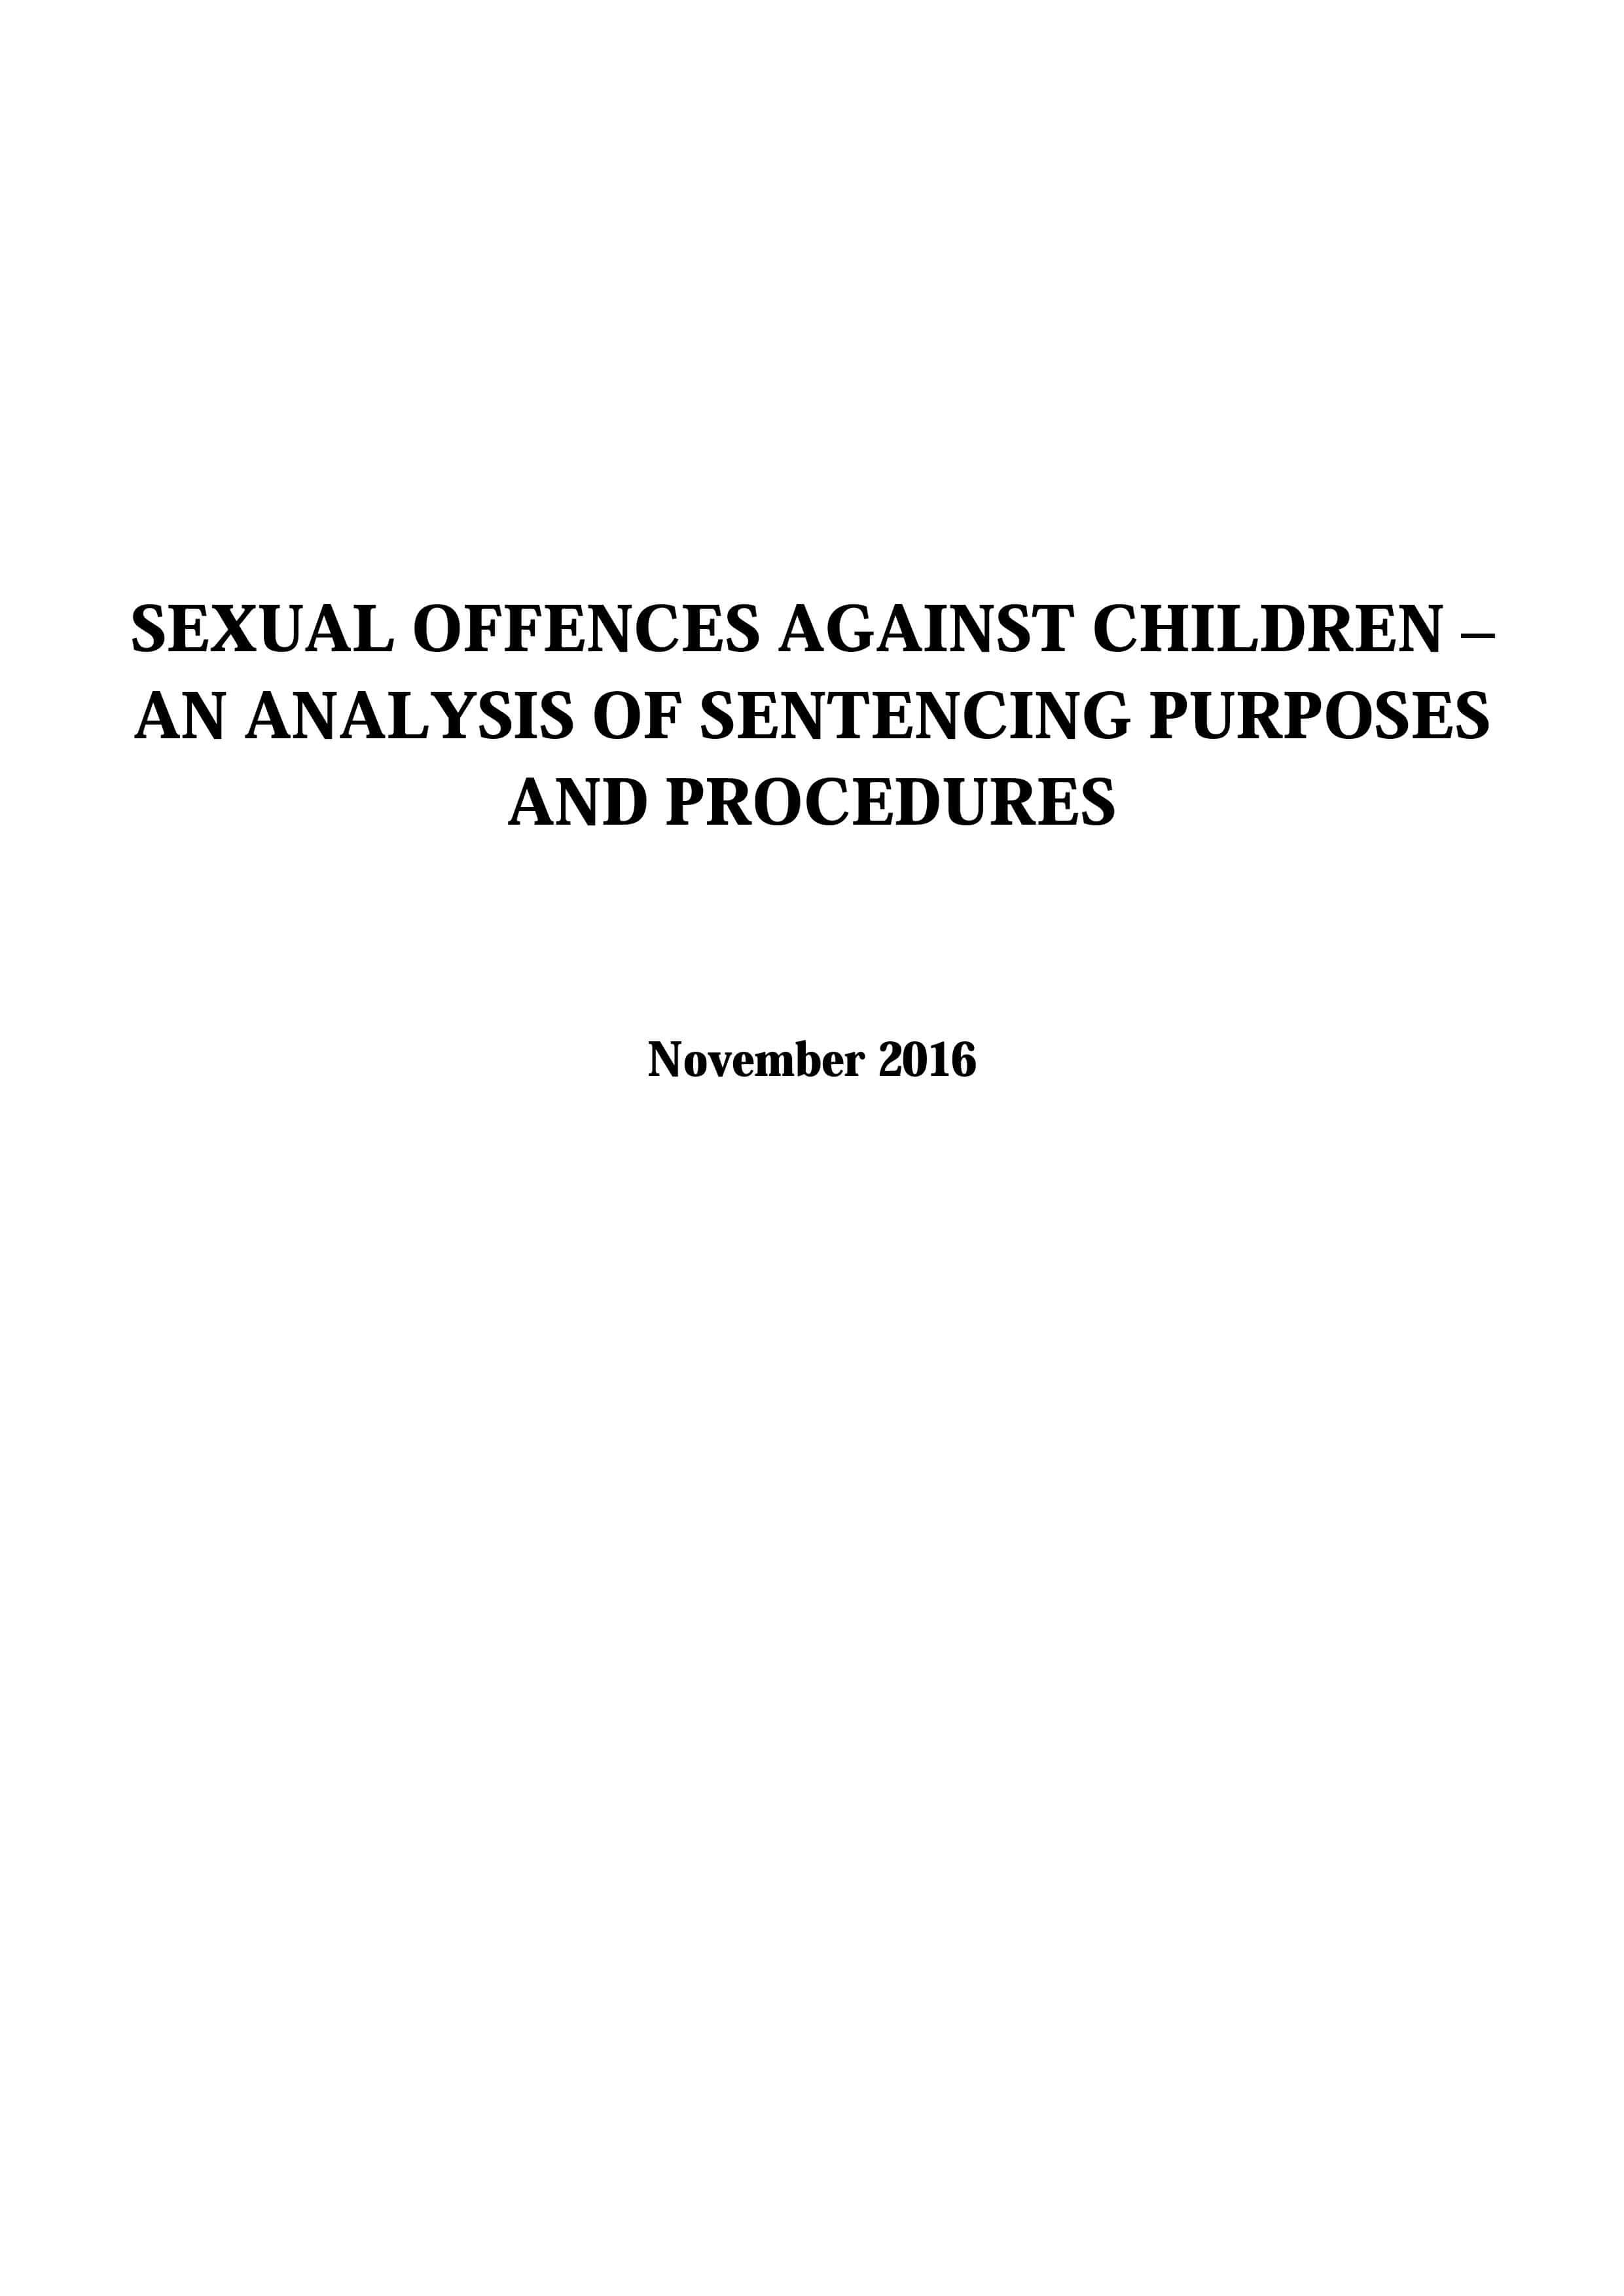 Sexual Offences Against Children – An Analysis Of Sentencing Purposes And Procedures - November 2016